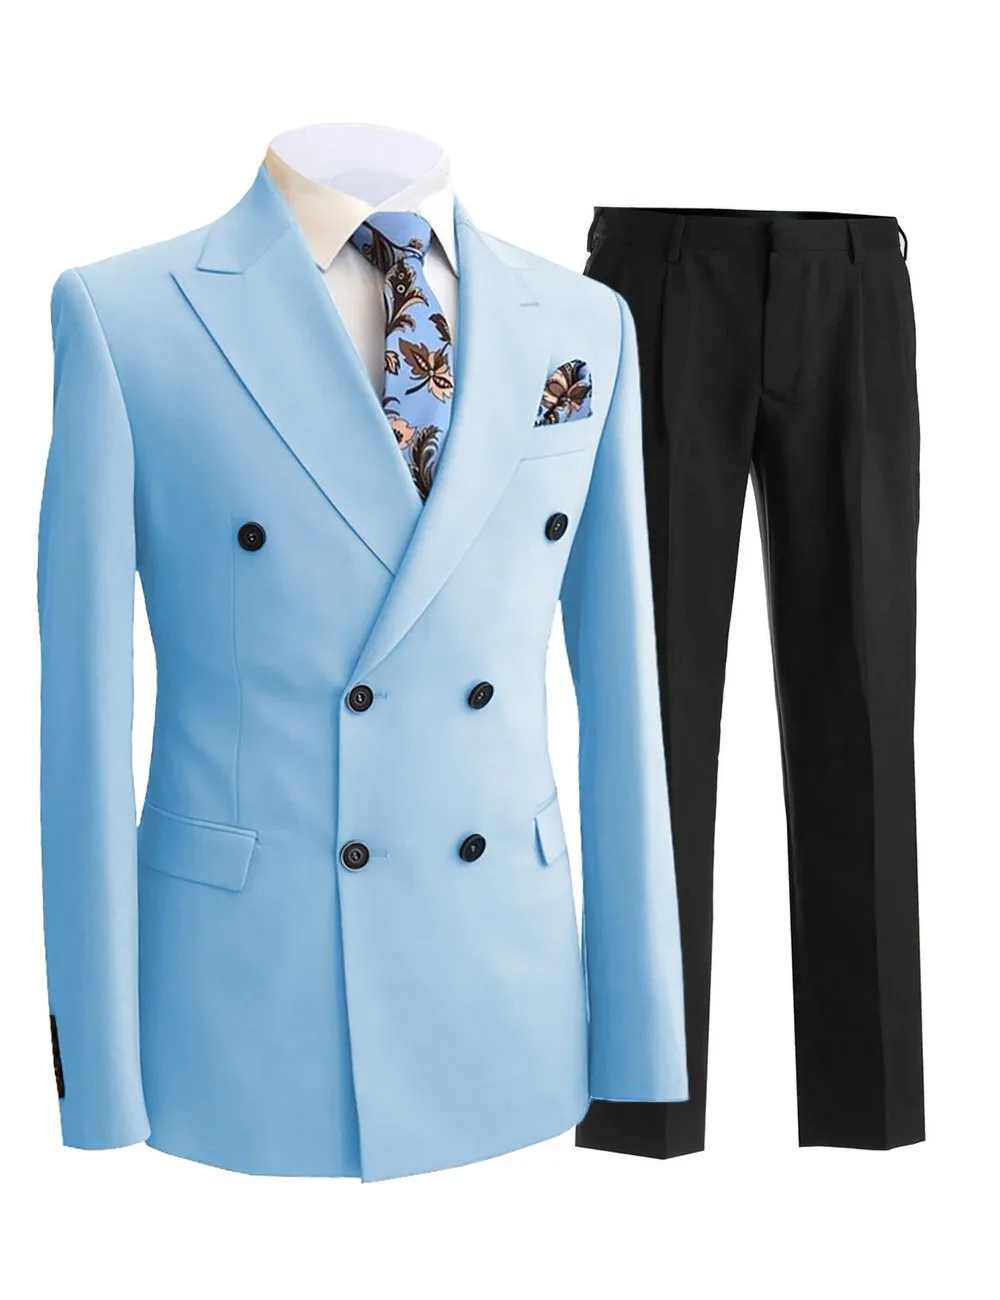 

Men Suit 2 Pieces Blue Gentleman Double Breasted Peak Lapel Formal For Wedding Groom Tuxedos Party Jacket With Black Pants